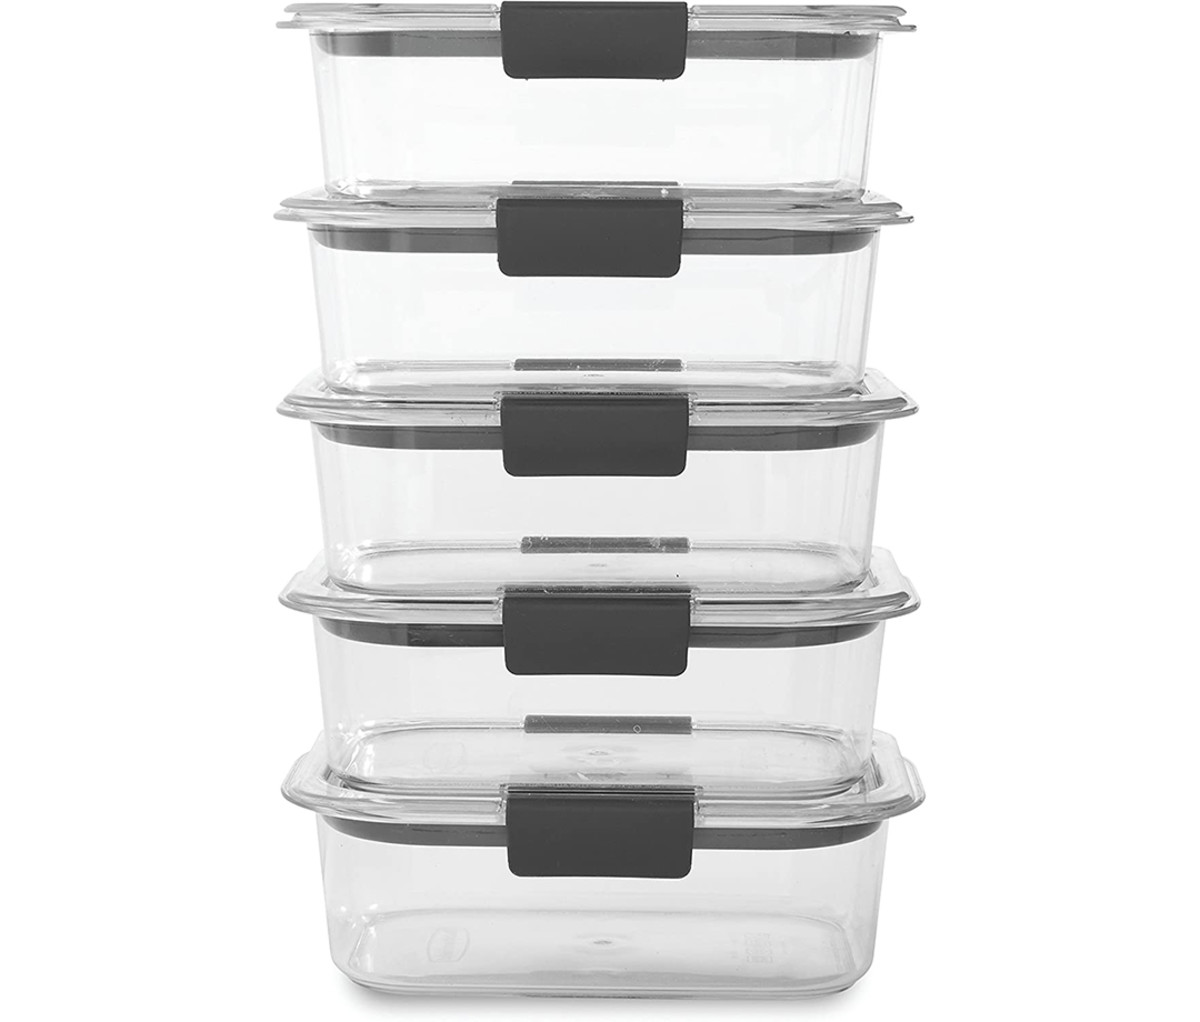 Rubbermaid Brilliance Food Storage Container 5 Pack